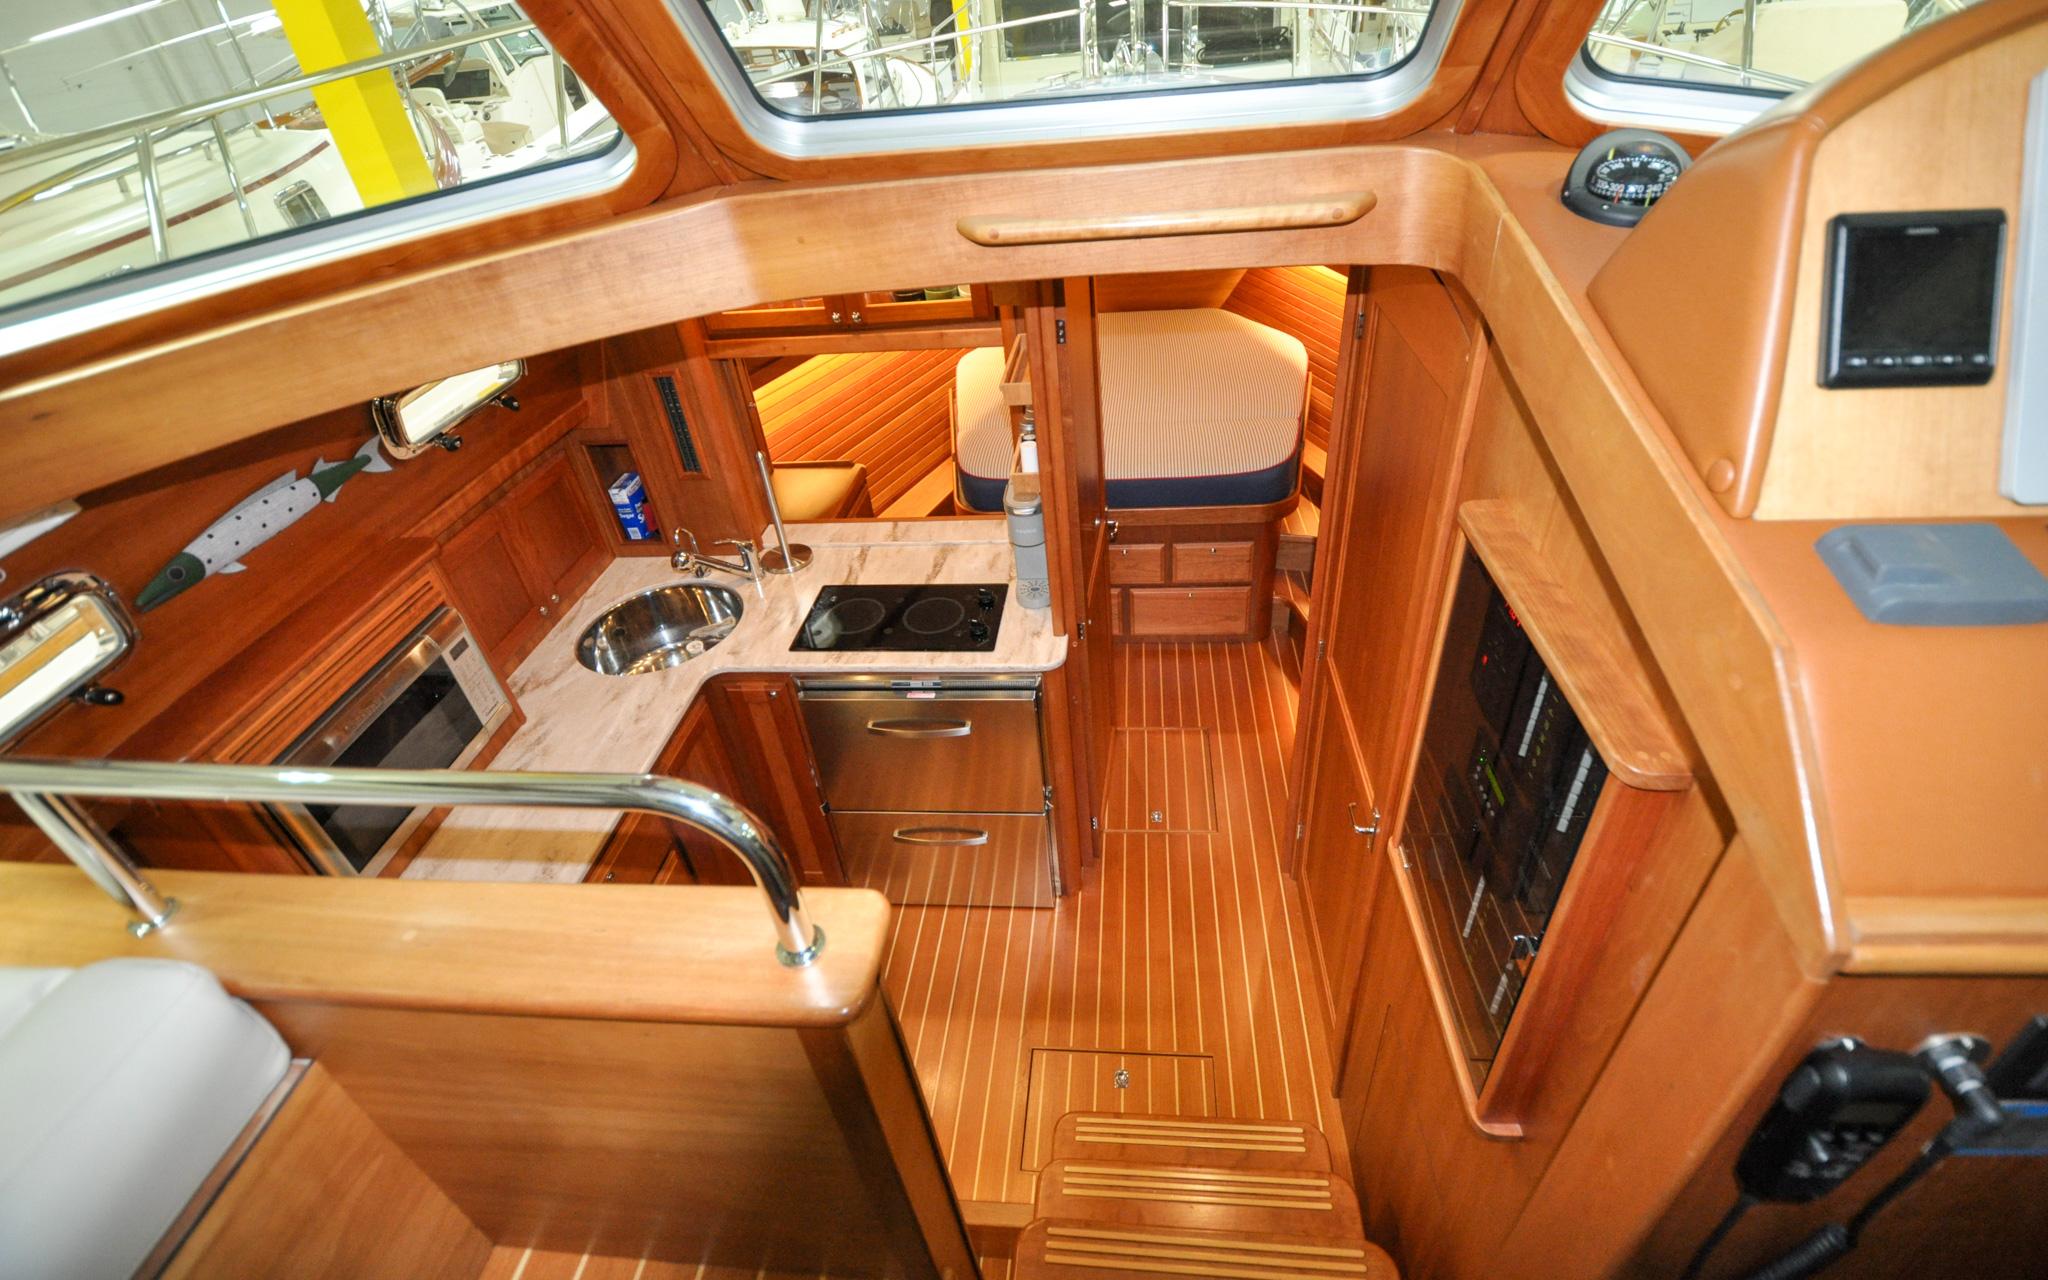 Sabre 38 Salon Express - Knot Done Yet - Galley